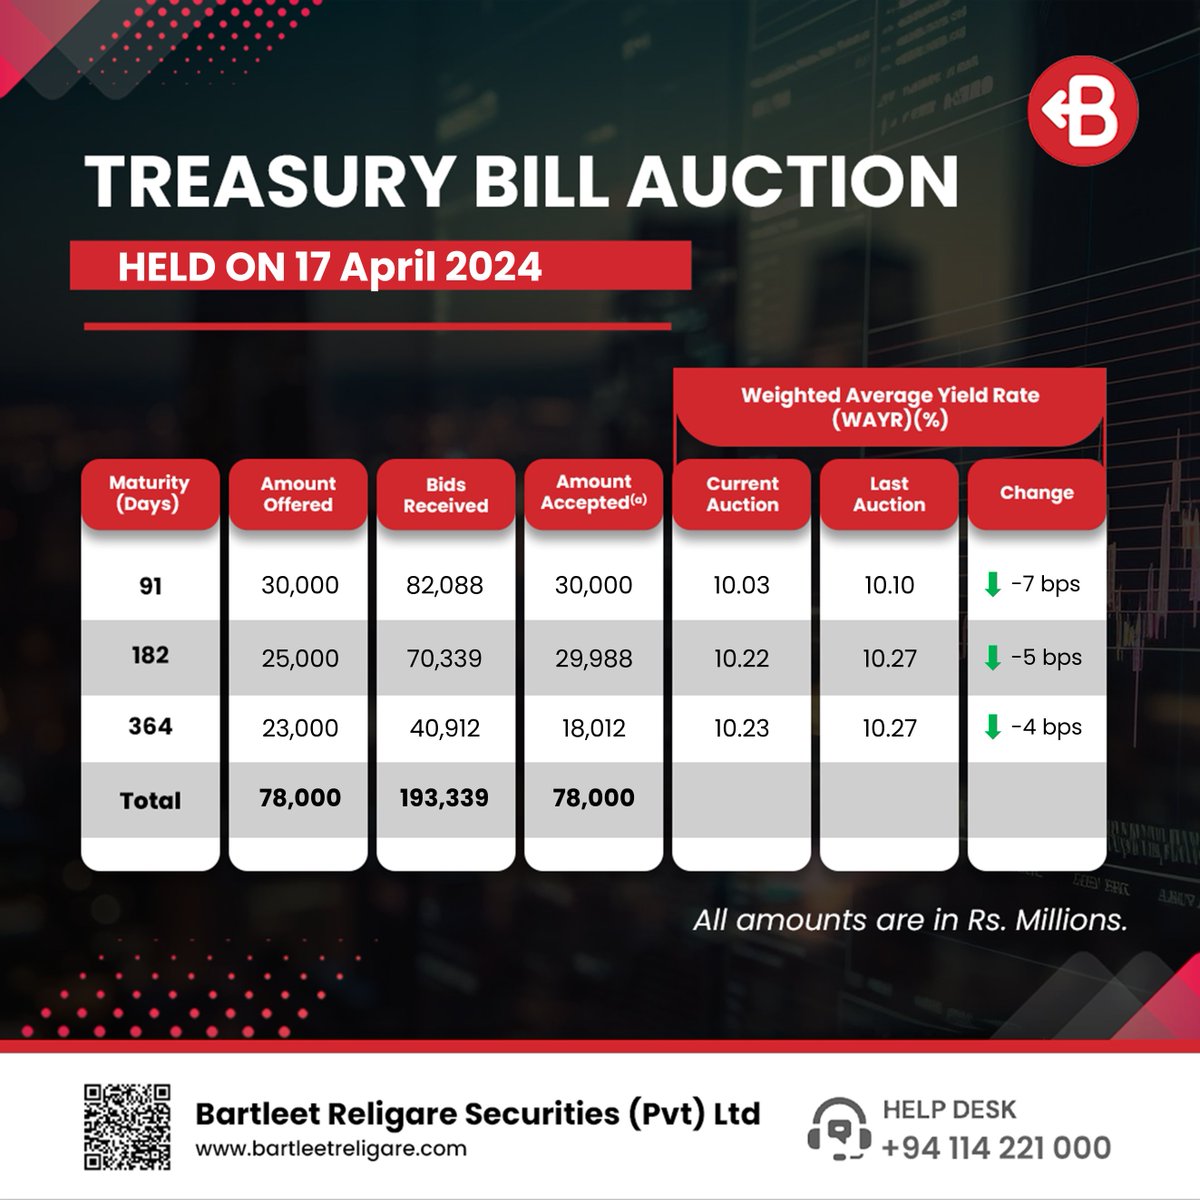 The official press release from the CBSL for the Treasury bill auction held on 17th of April 2024.
#BRS #Tbill2024 #CBSL